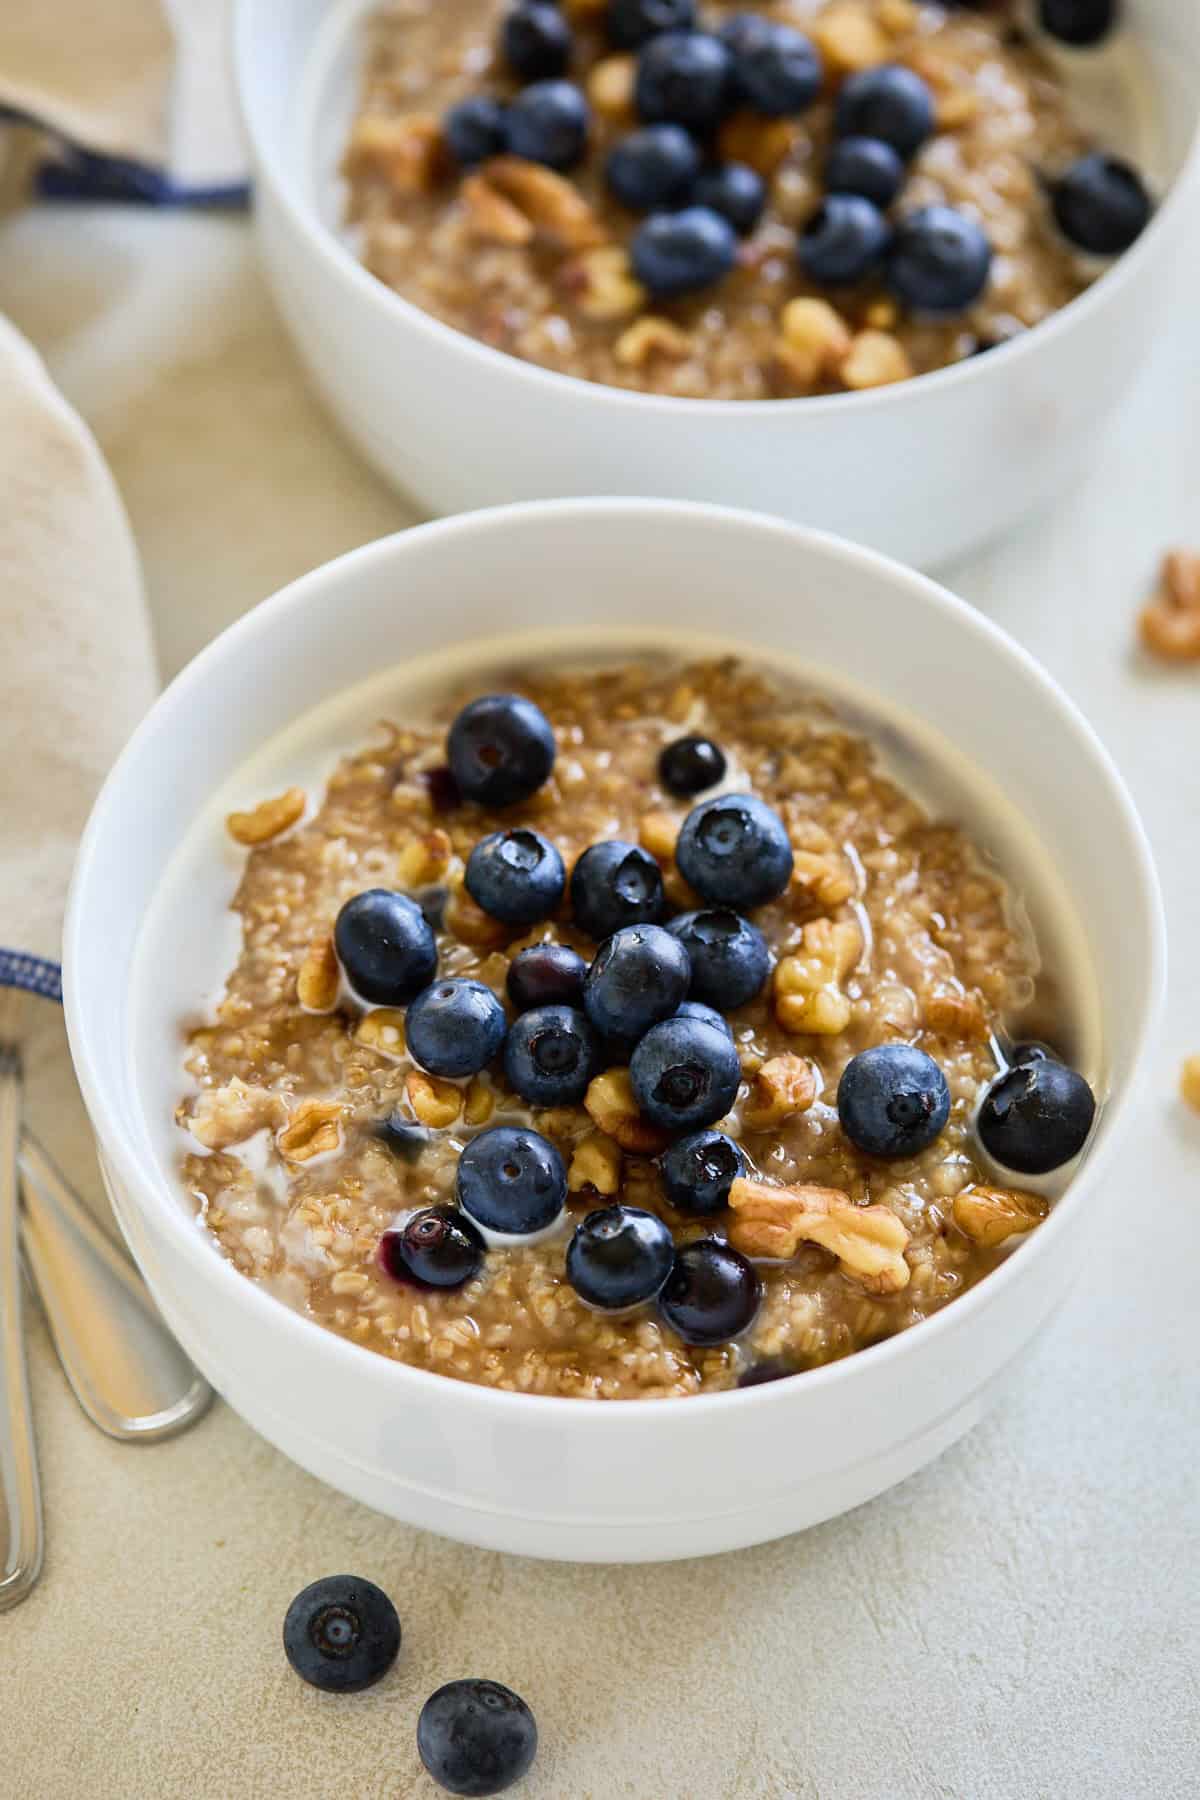 Steel cut oats with fresh blueberries and walnuts served in a white bowl, with a drizzle of milk.